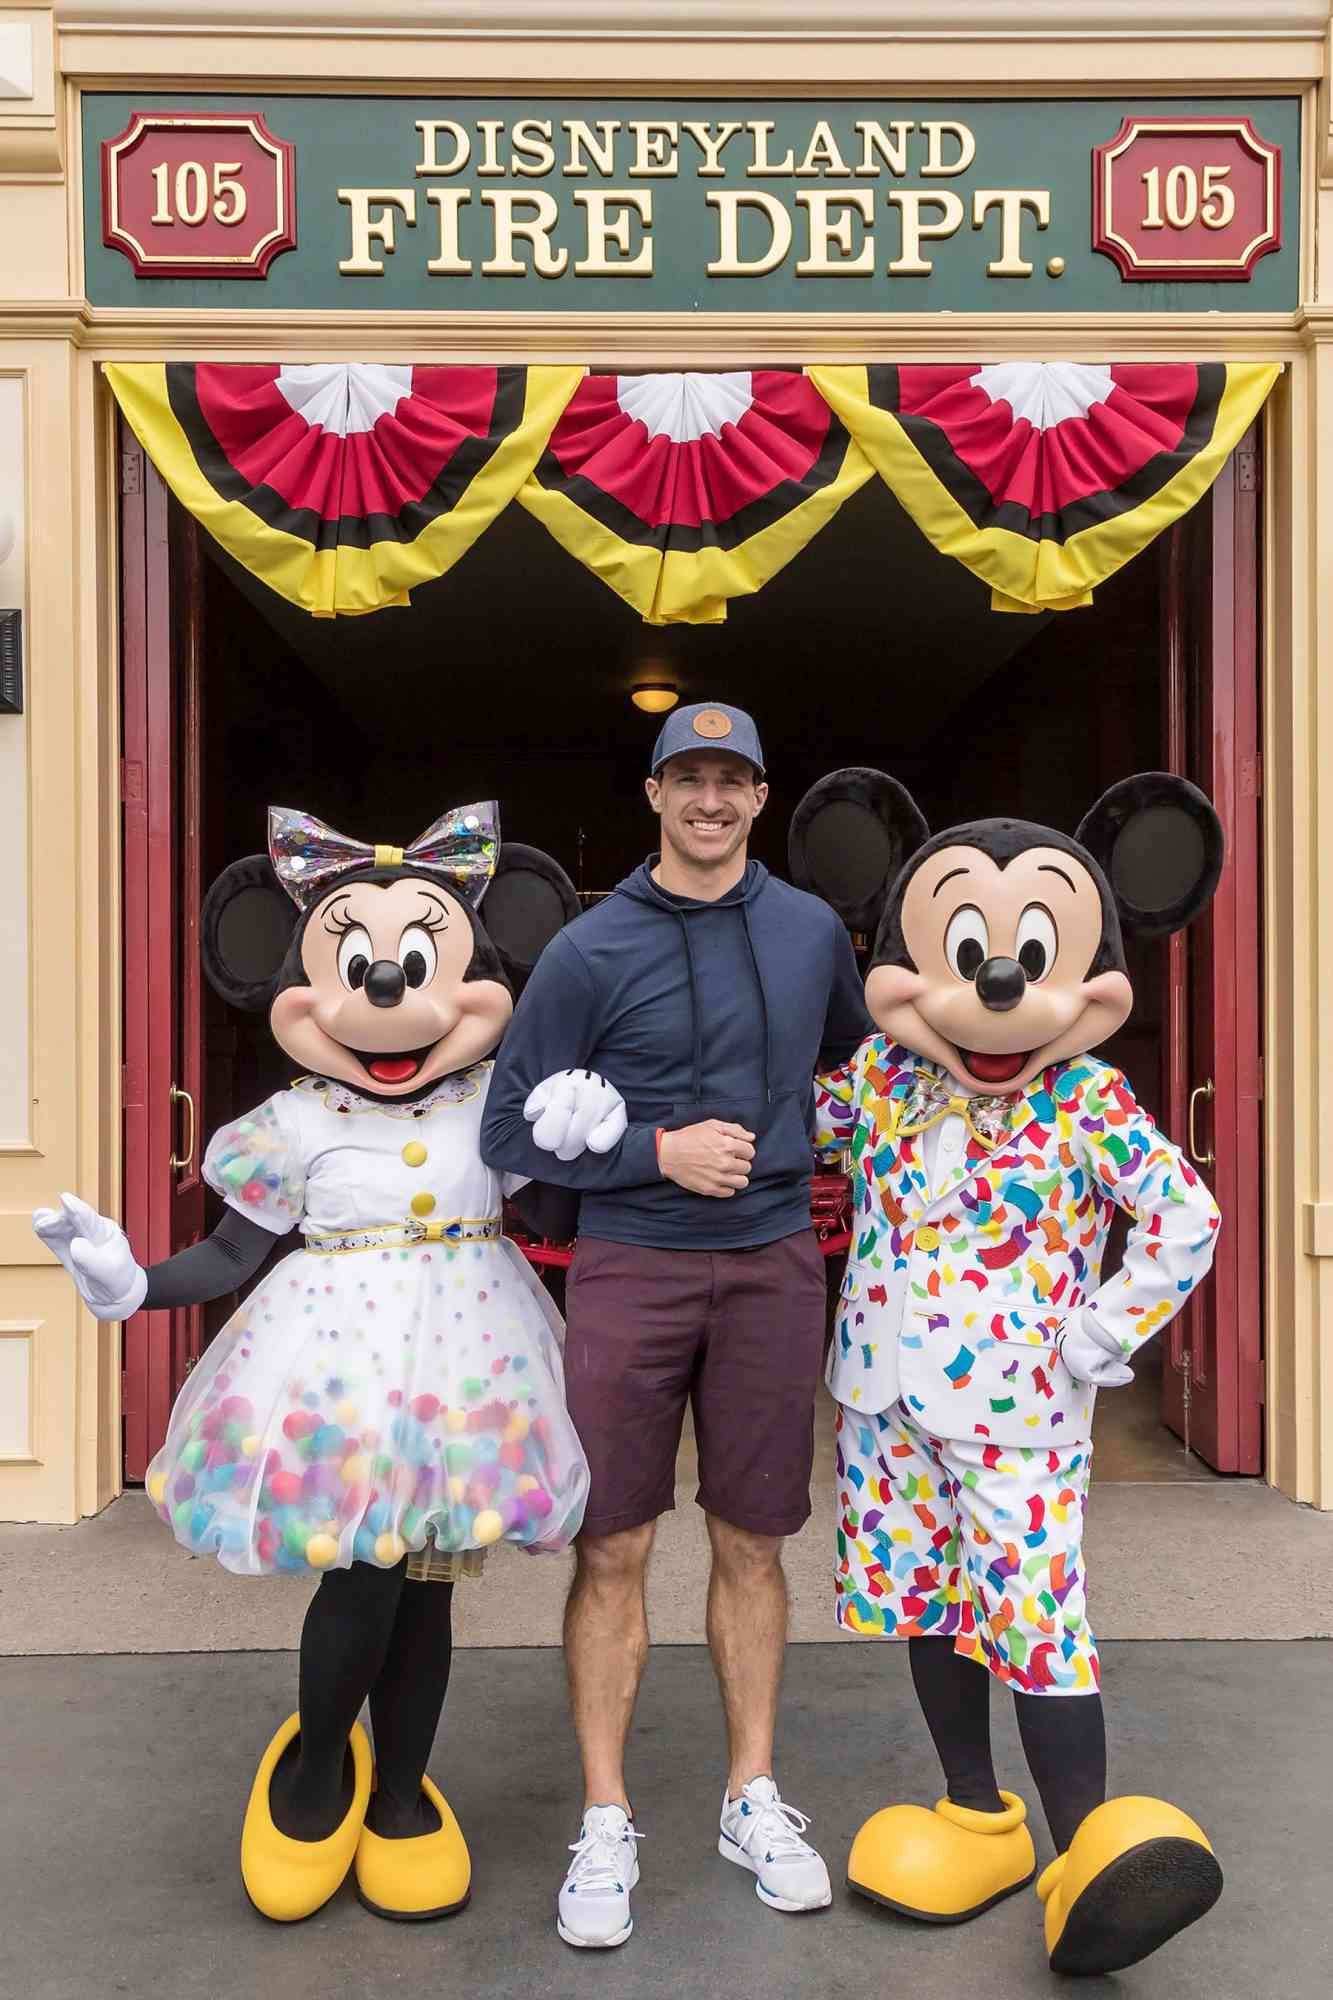 Drew Brees And Family Celebrate Vacation With Mickey Mouse And Minnie Mouse At Disneyland Park